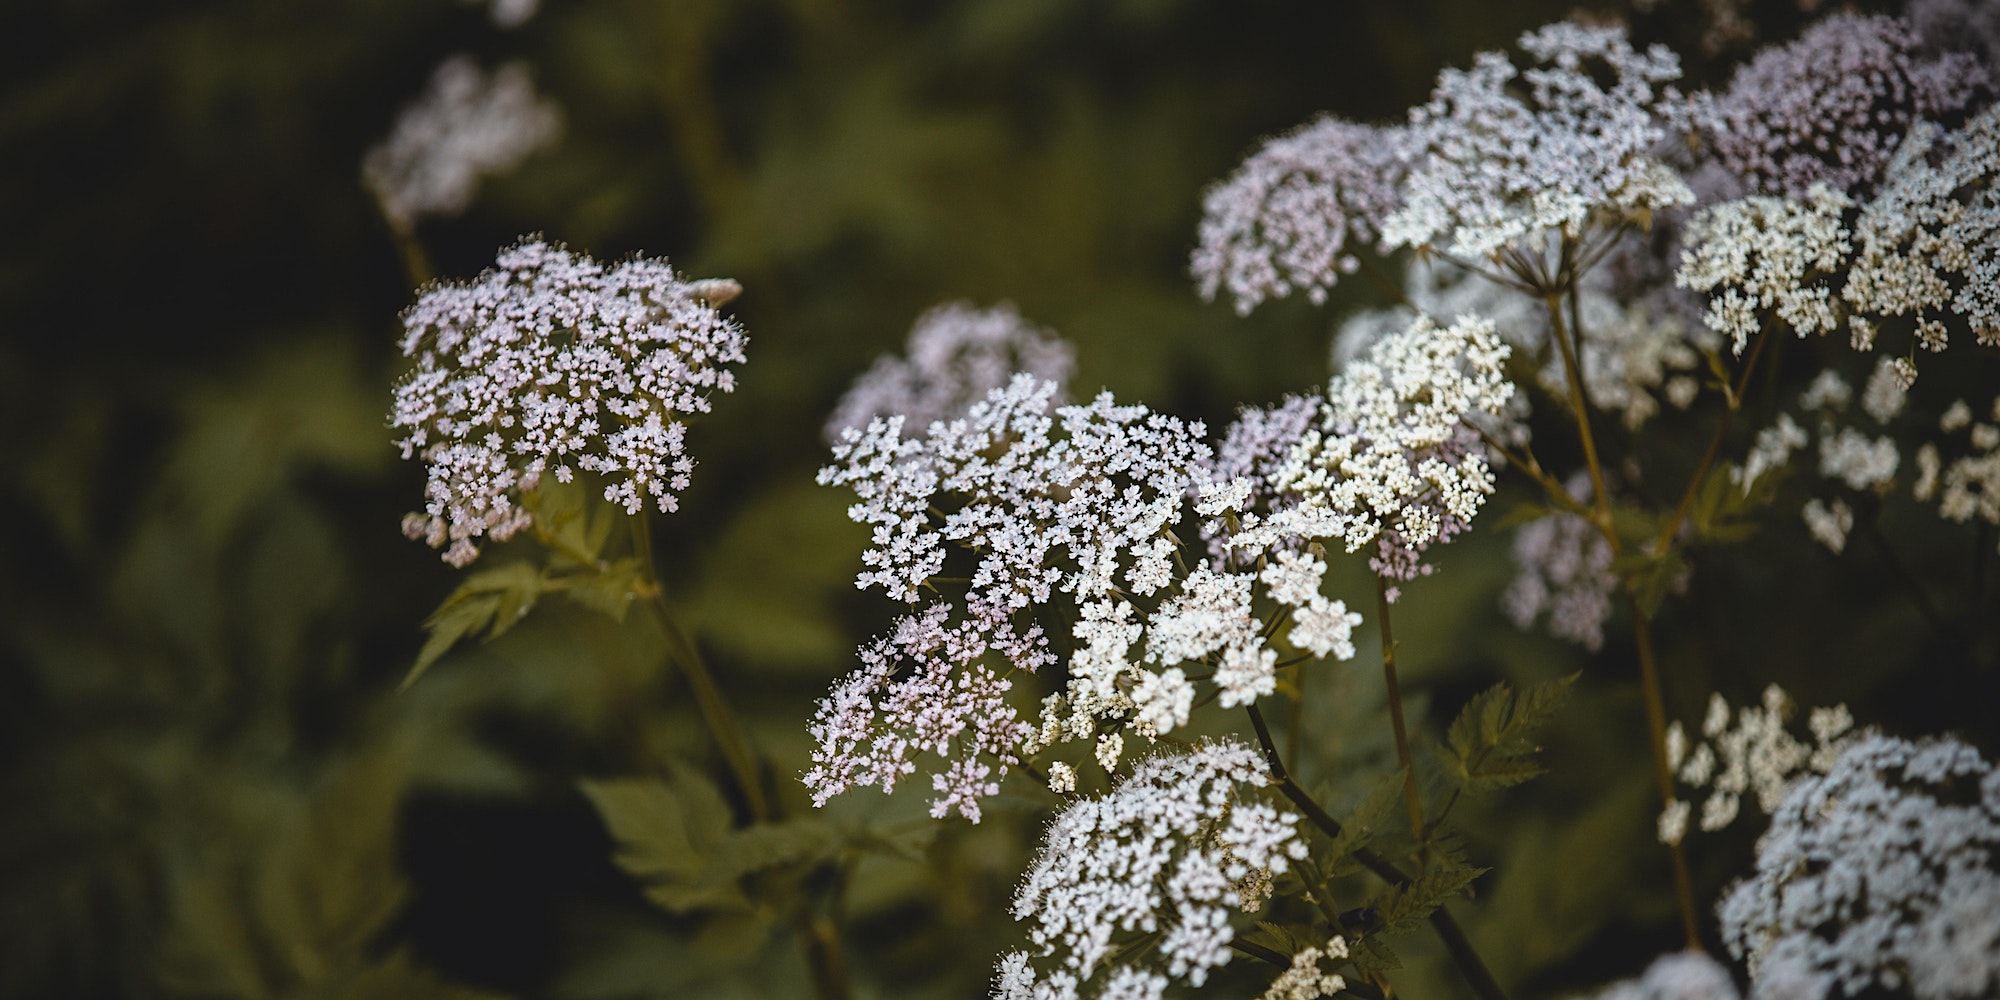 Queen Anne's Lace in bloom